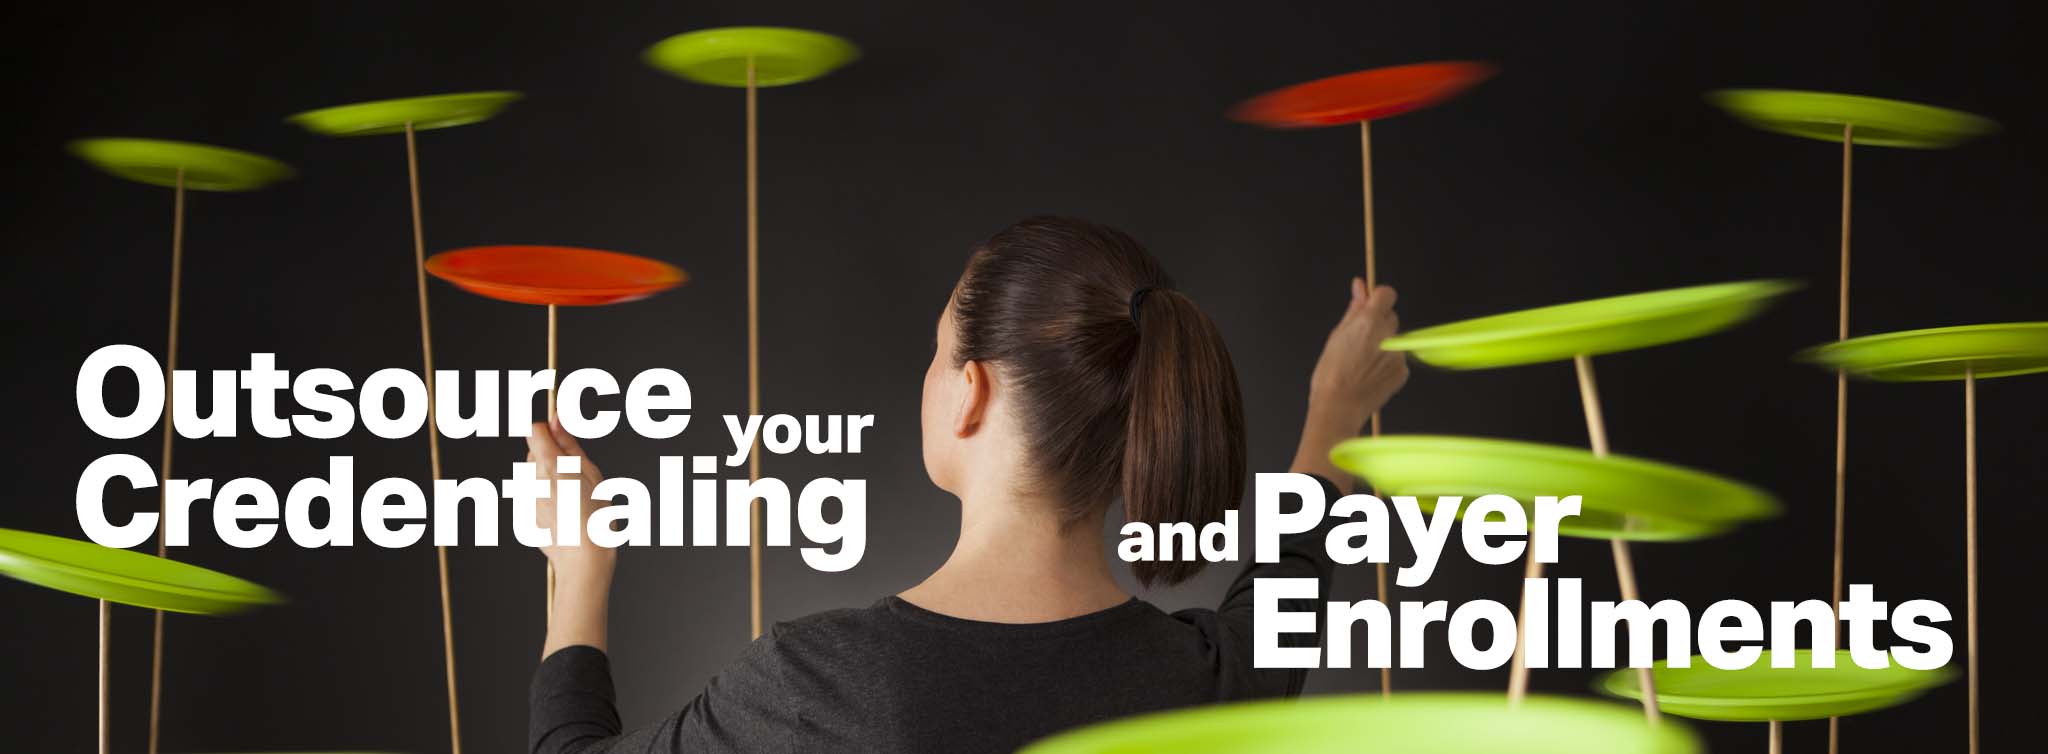 Outsource your Credentialing and Payer Enrollments